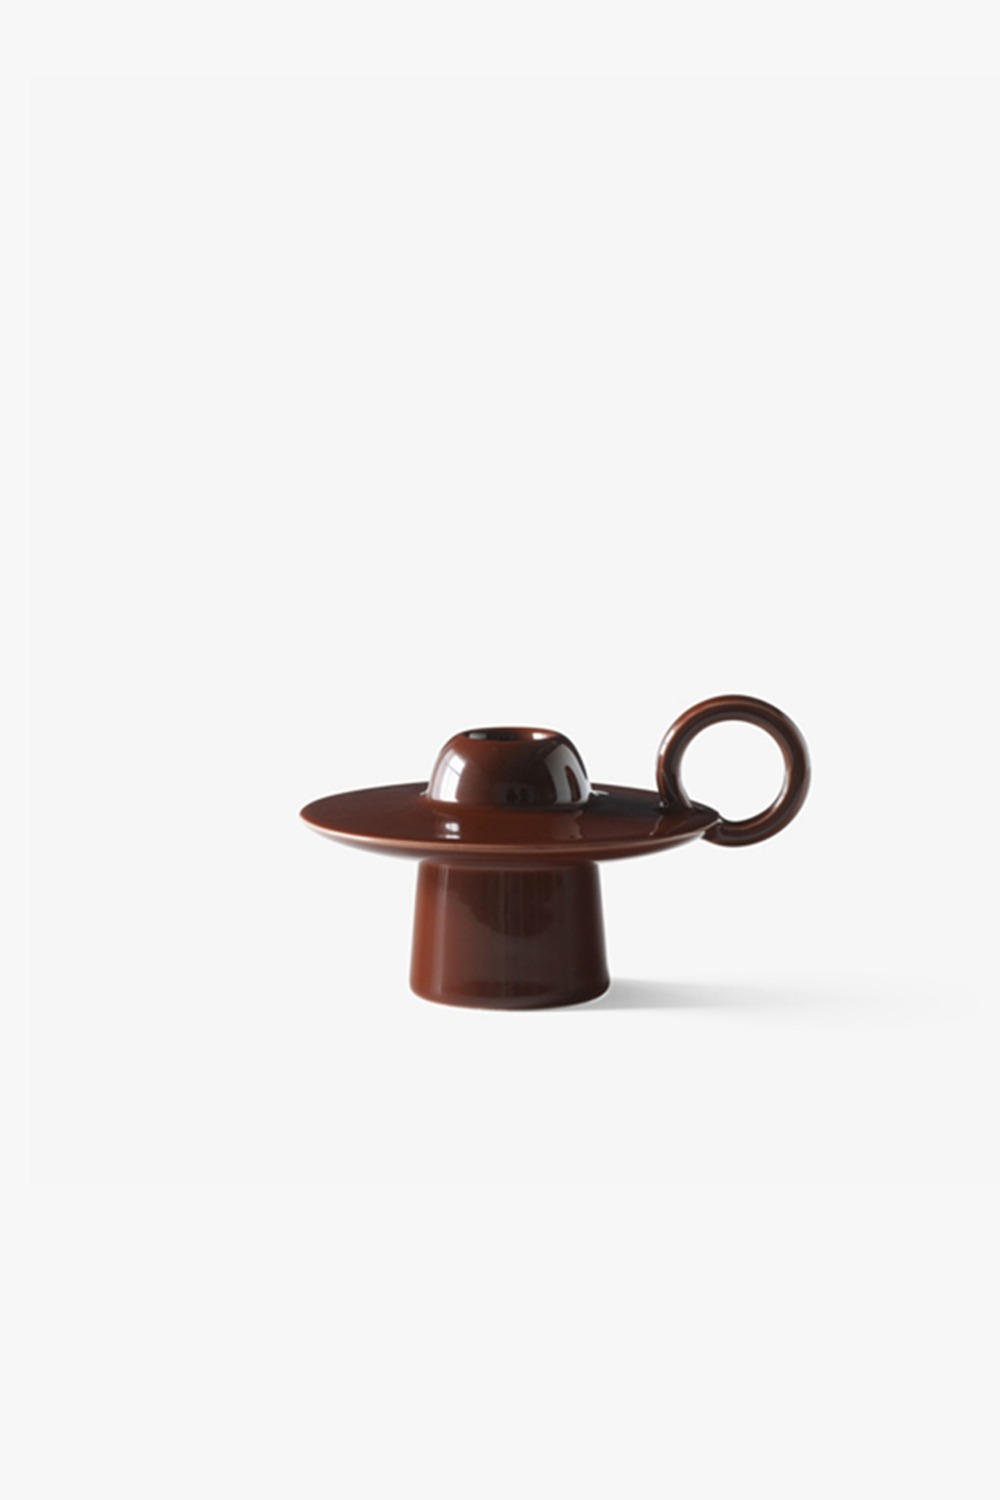 [&amp;Tradition] Momento Candleholder JH39 (Red Brown)